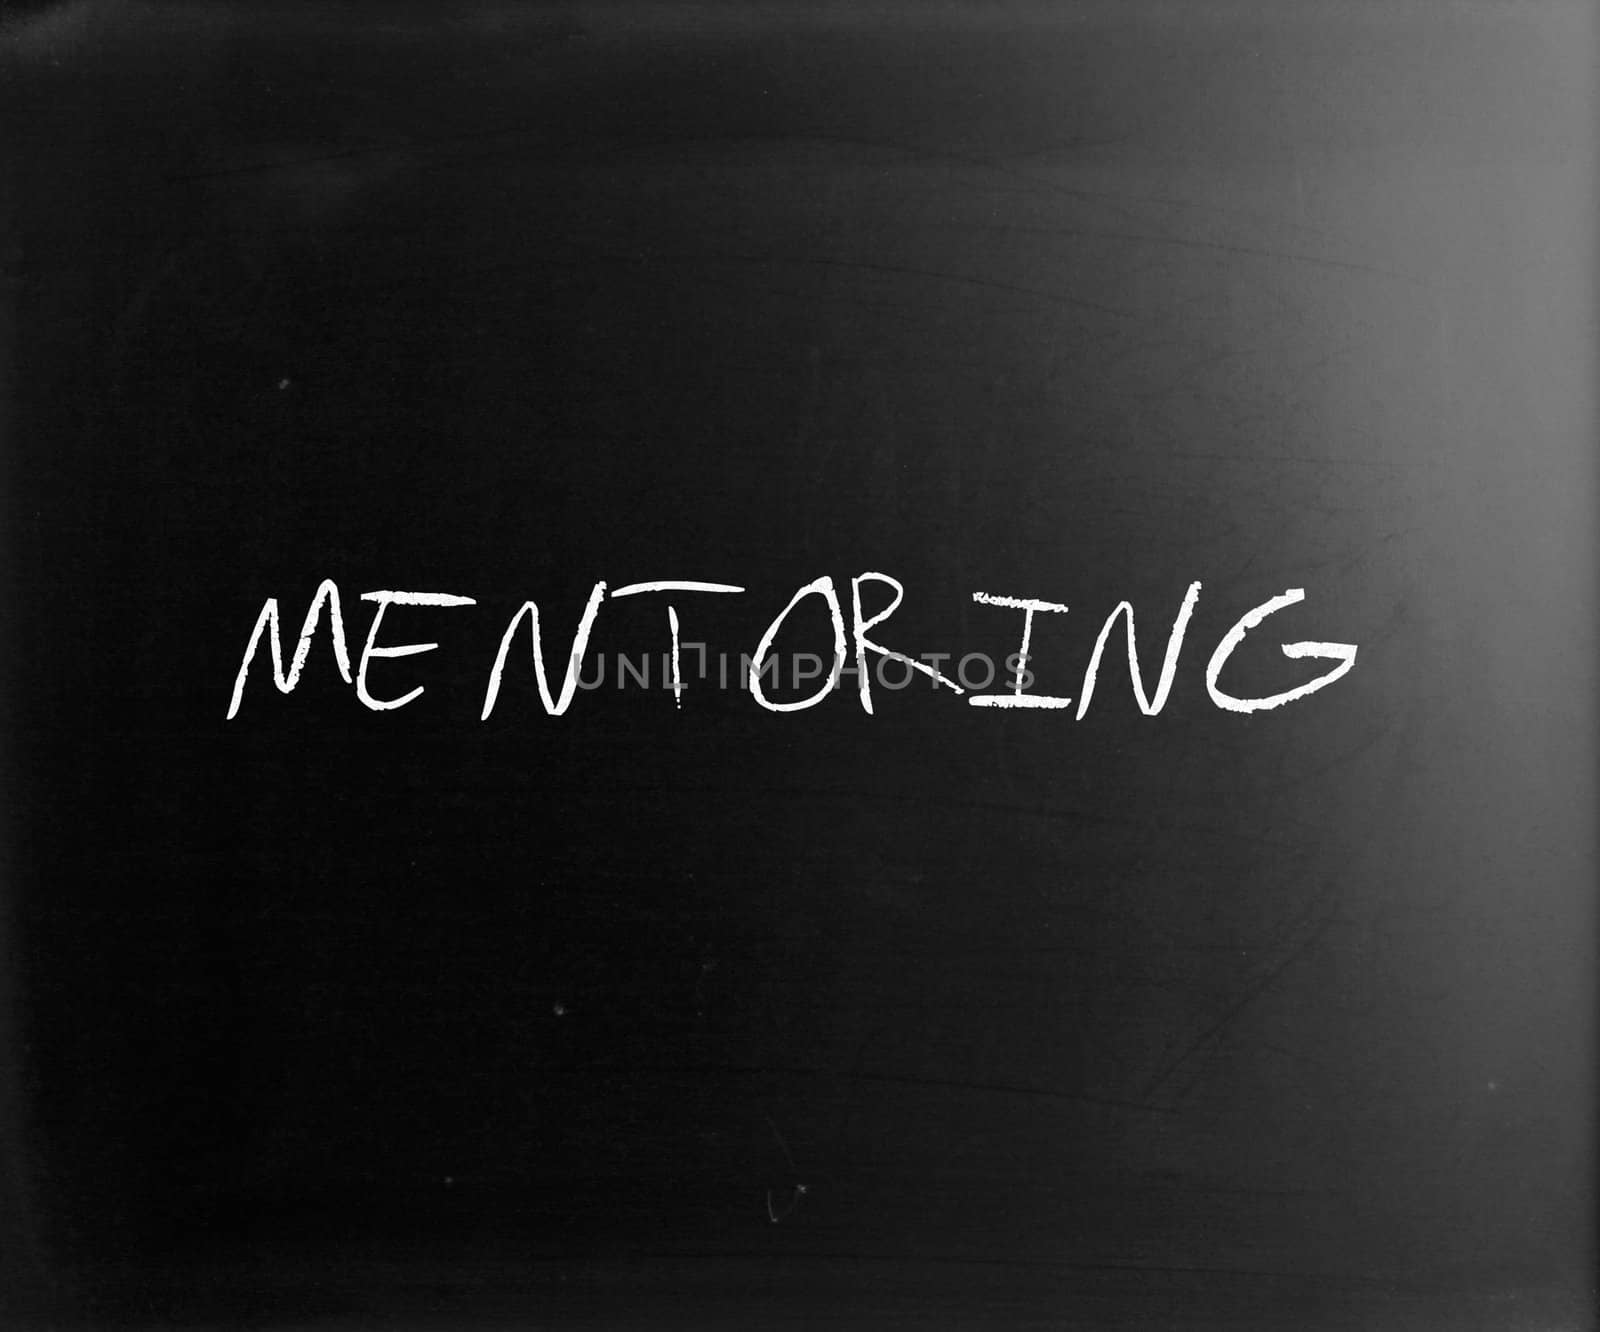 The word "Mentoring" handwritten with white chalk on a blackboard.